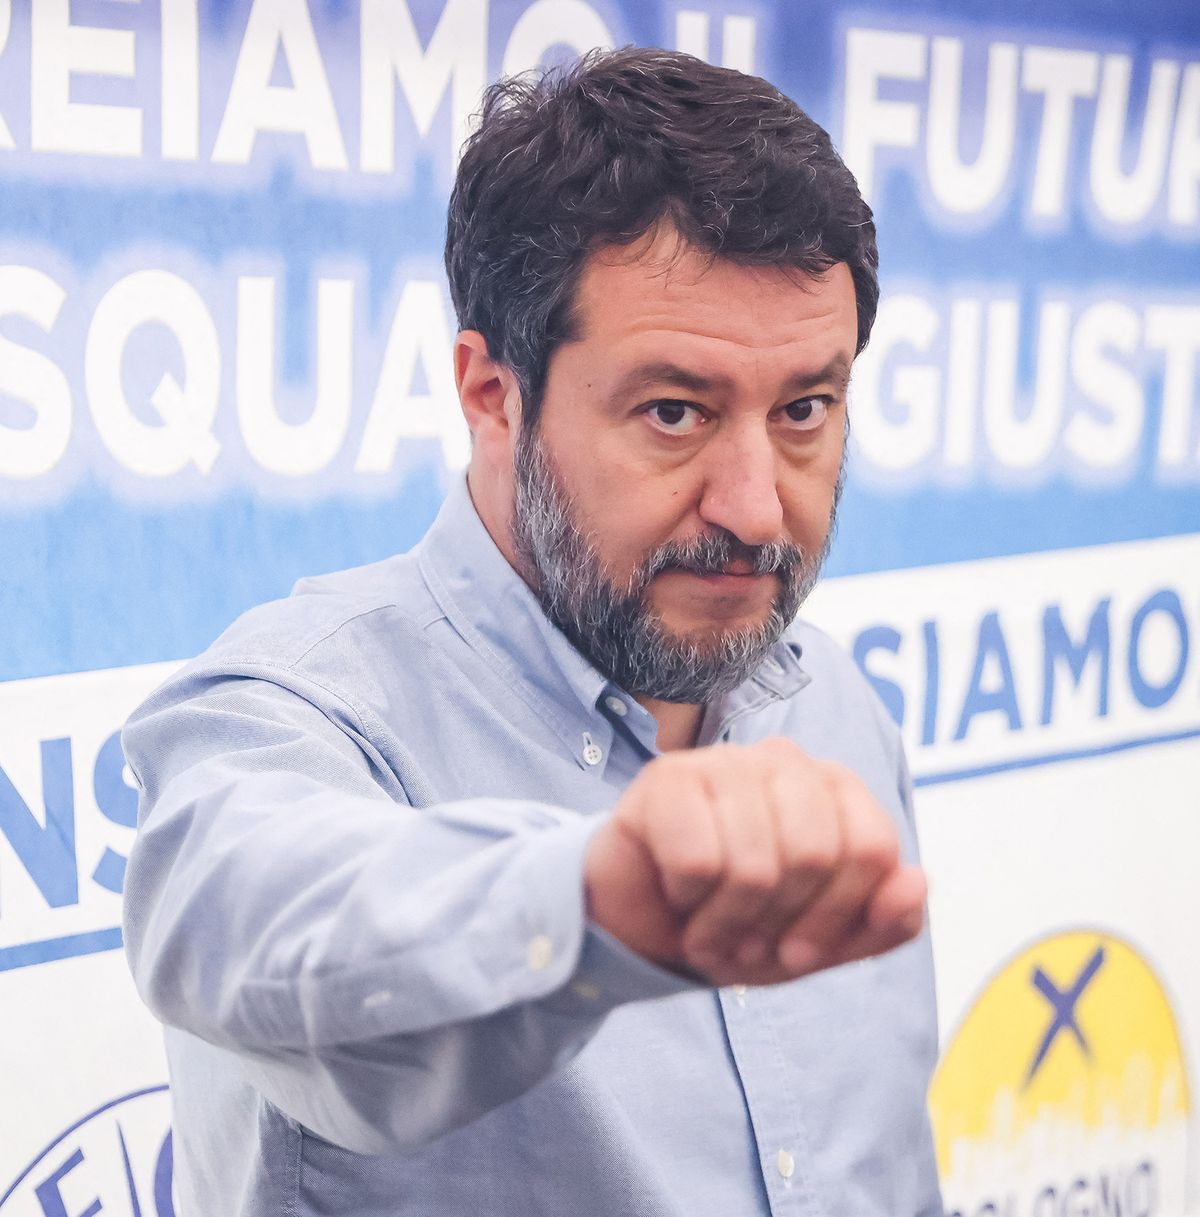 Matteo Salvini Attends A Rally For The Elections In Cologno Monzese In Milan